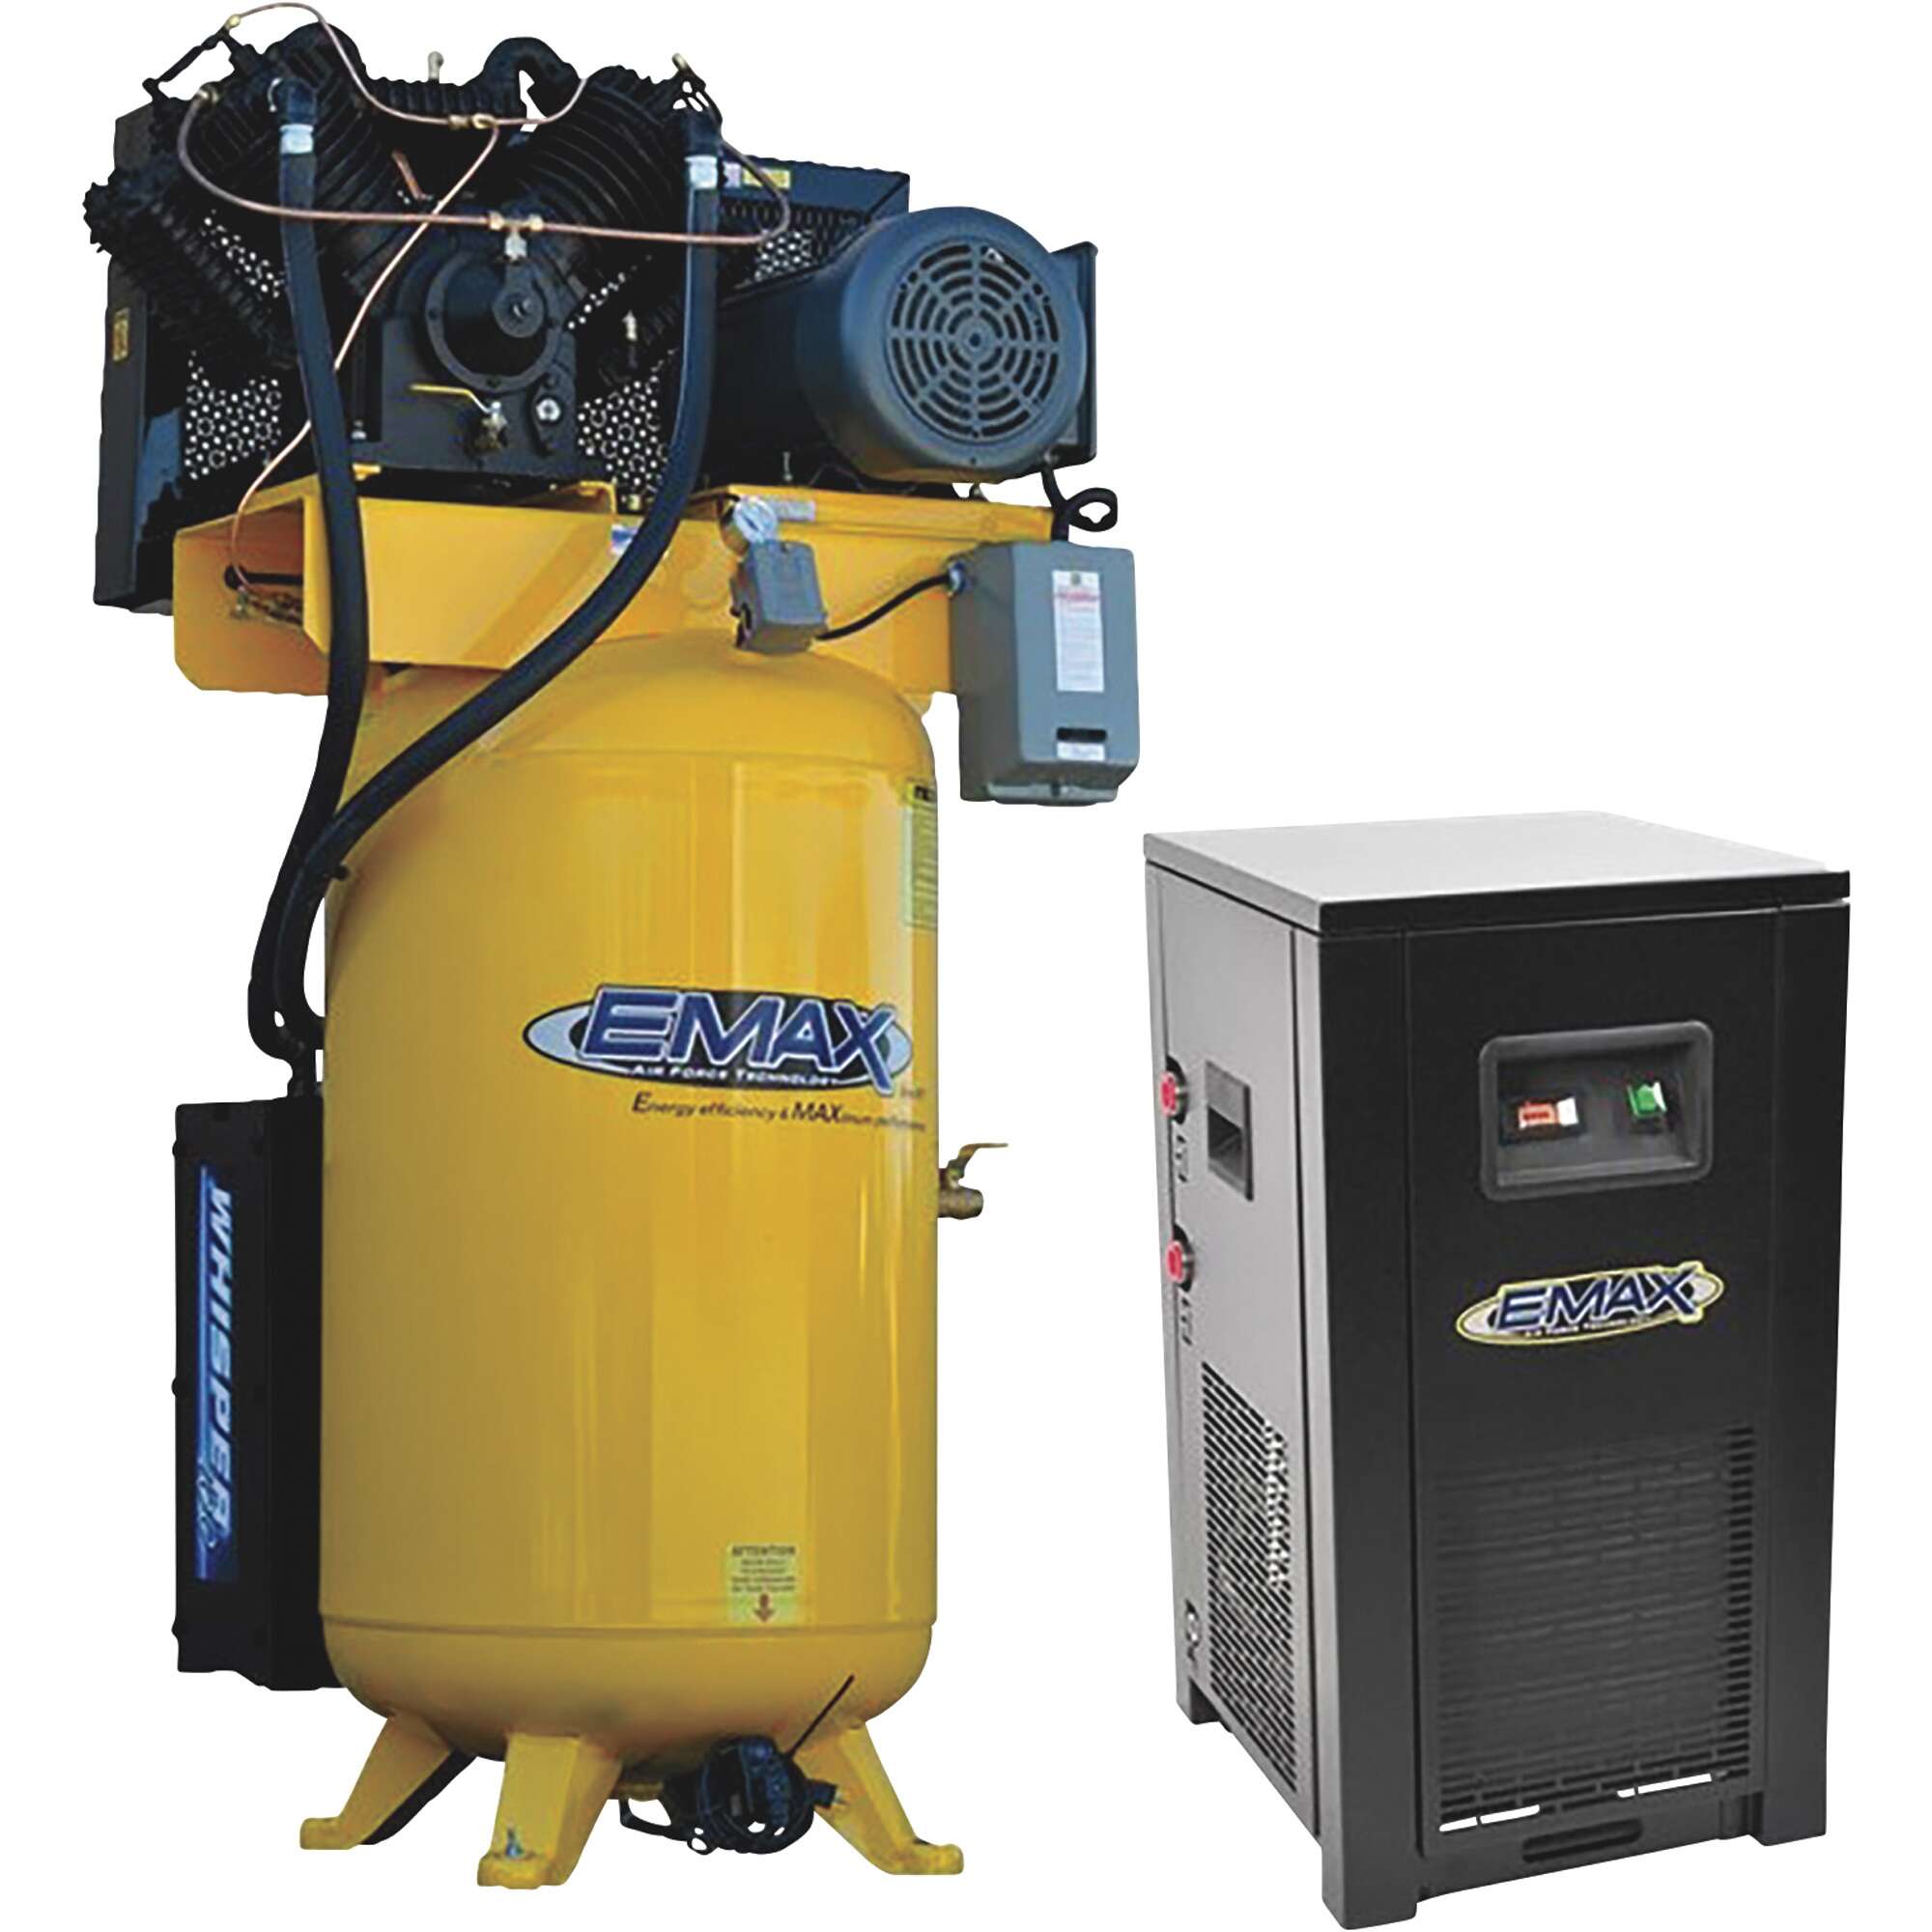 EMAX Industrial Plus 10 HP 2 Stage V4 1 Phase Piston Air Compressor 80 Gallon Vertical Tank 58 CFM Air Dryer